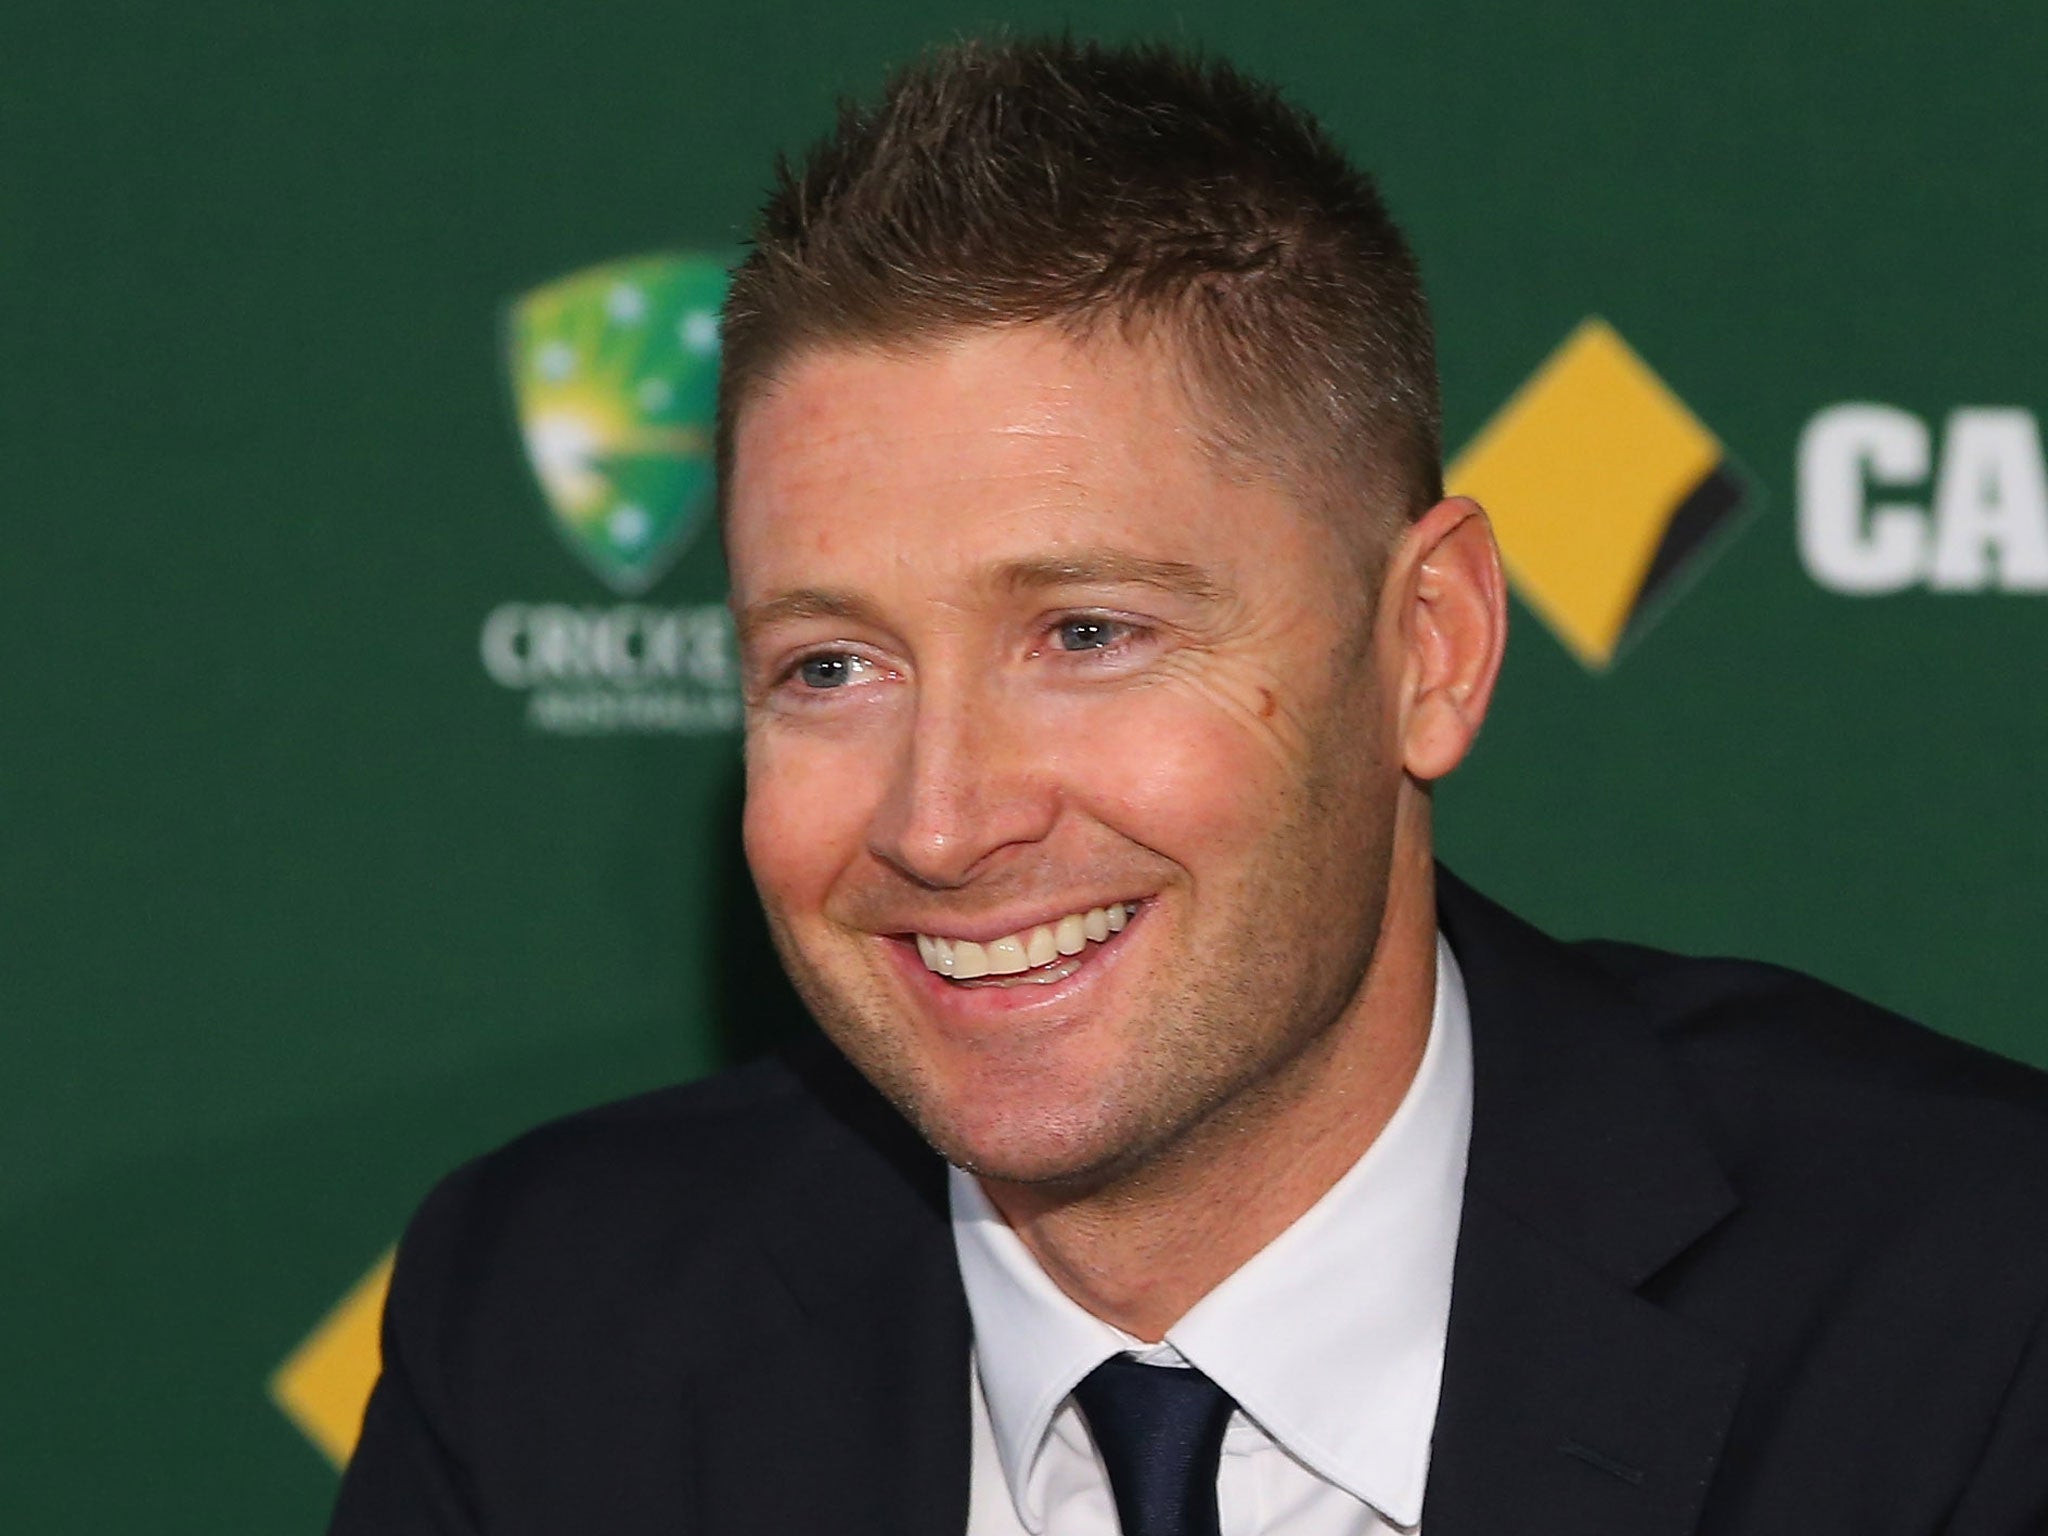 Michael Clarke has got the Ashes mind games underway by announcing the England team for the first Test